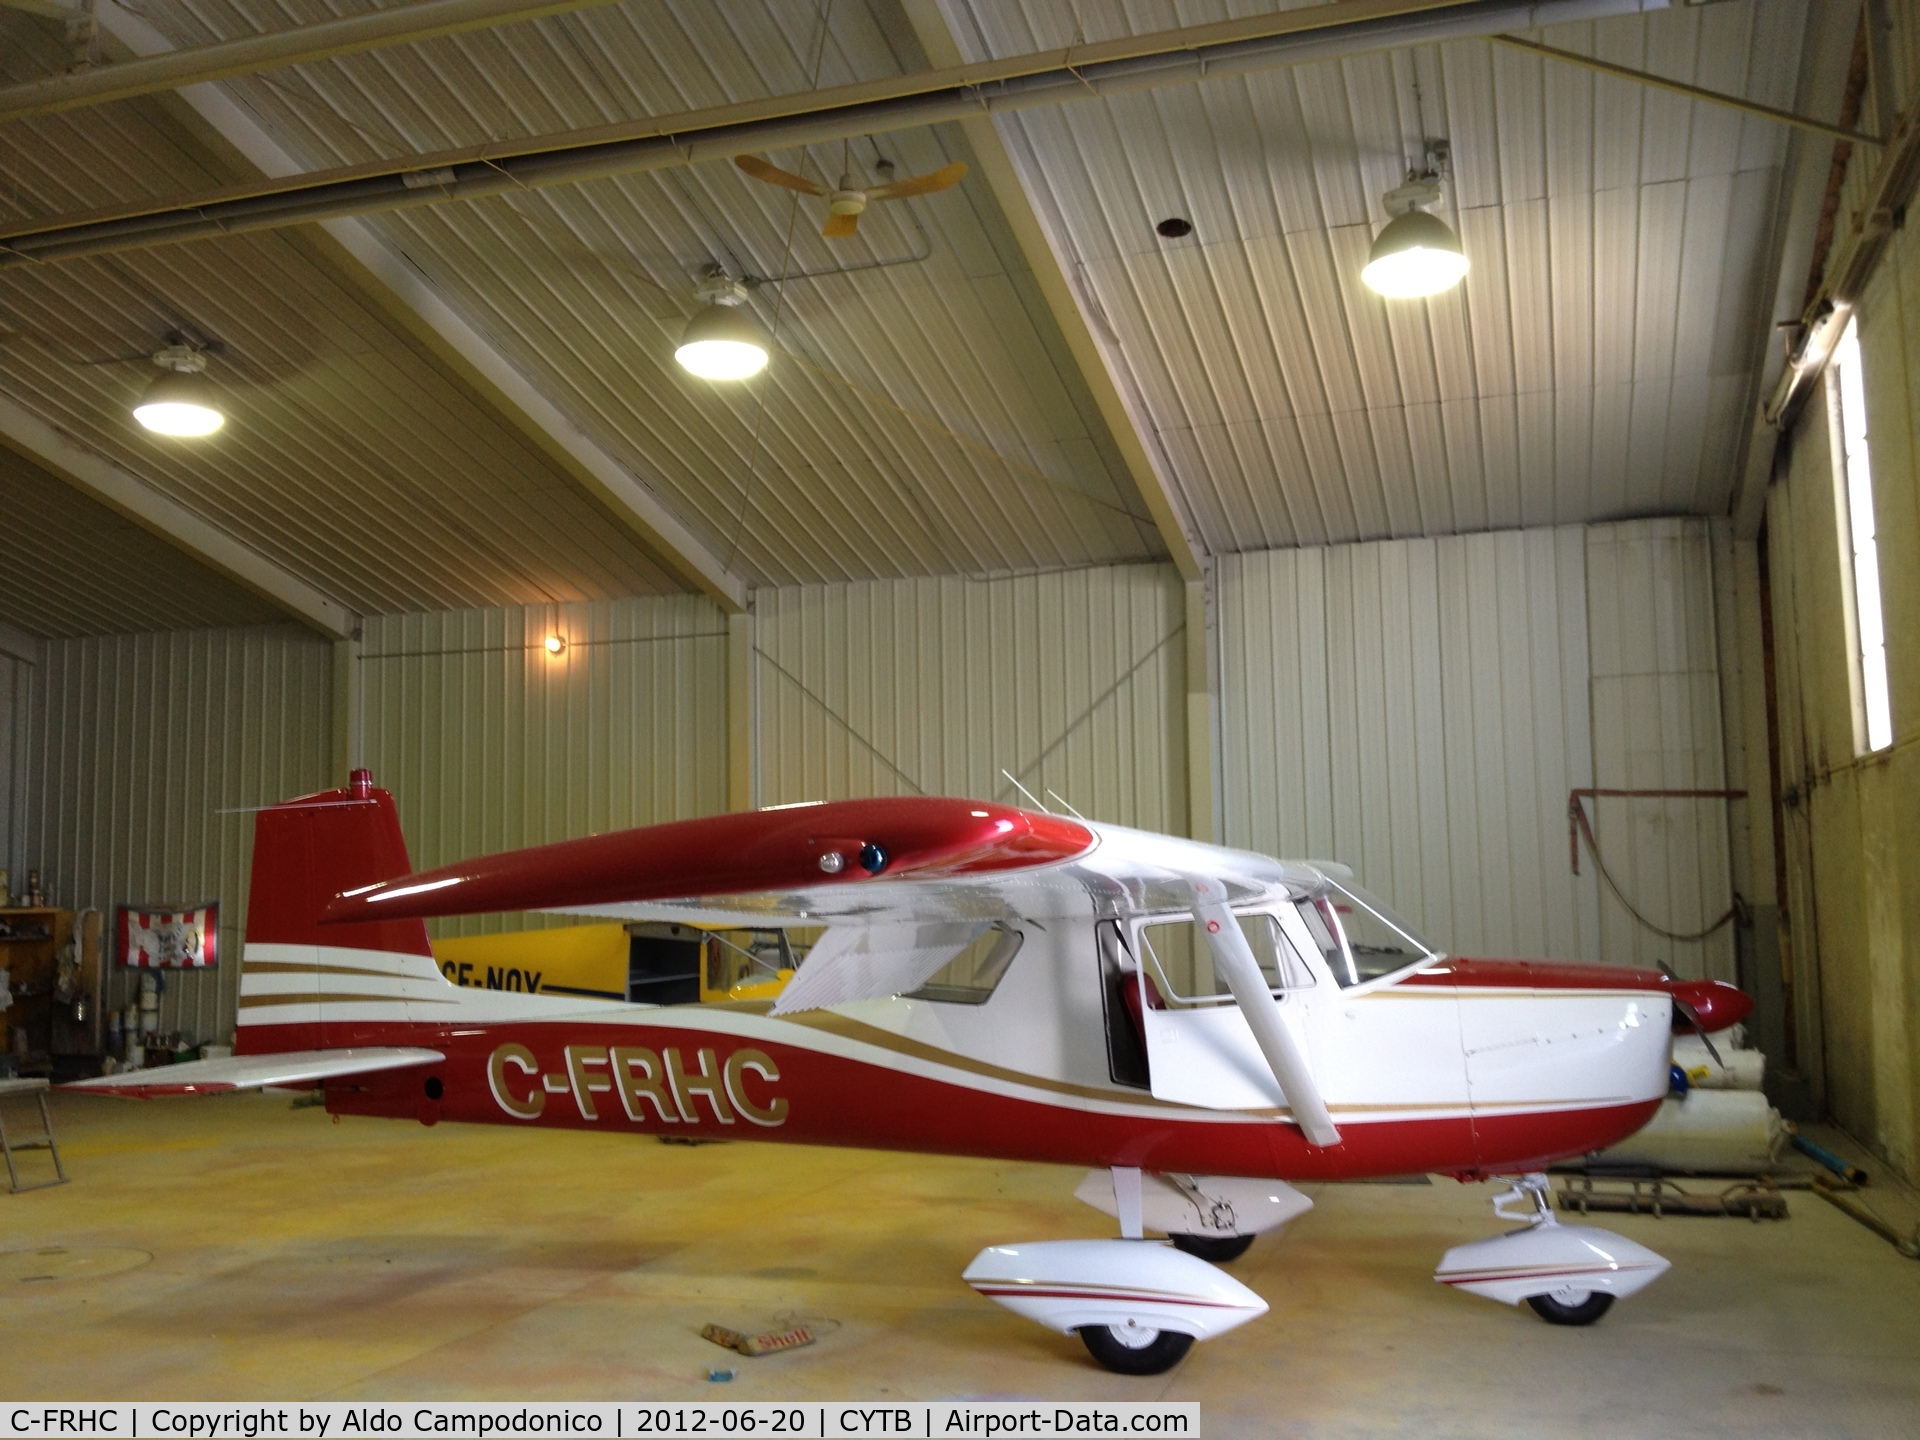 C-FRHC, 1964 Cessna 150D C/N 15060577, The airplane was restored and looks and flies like new.